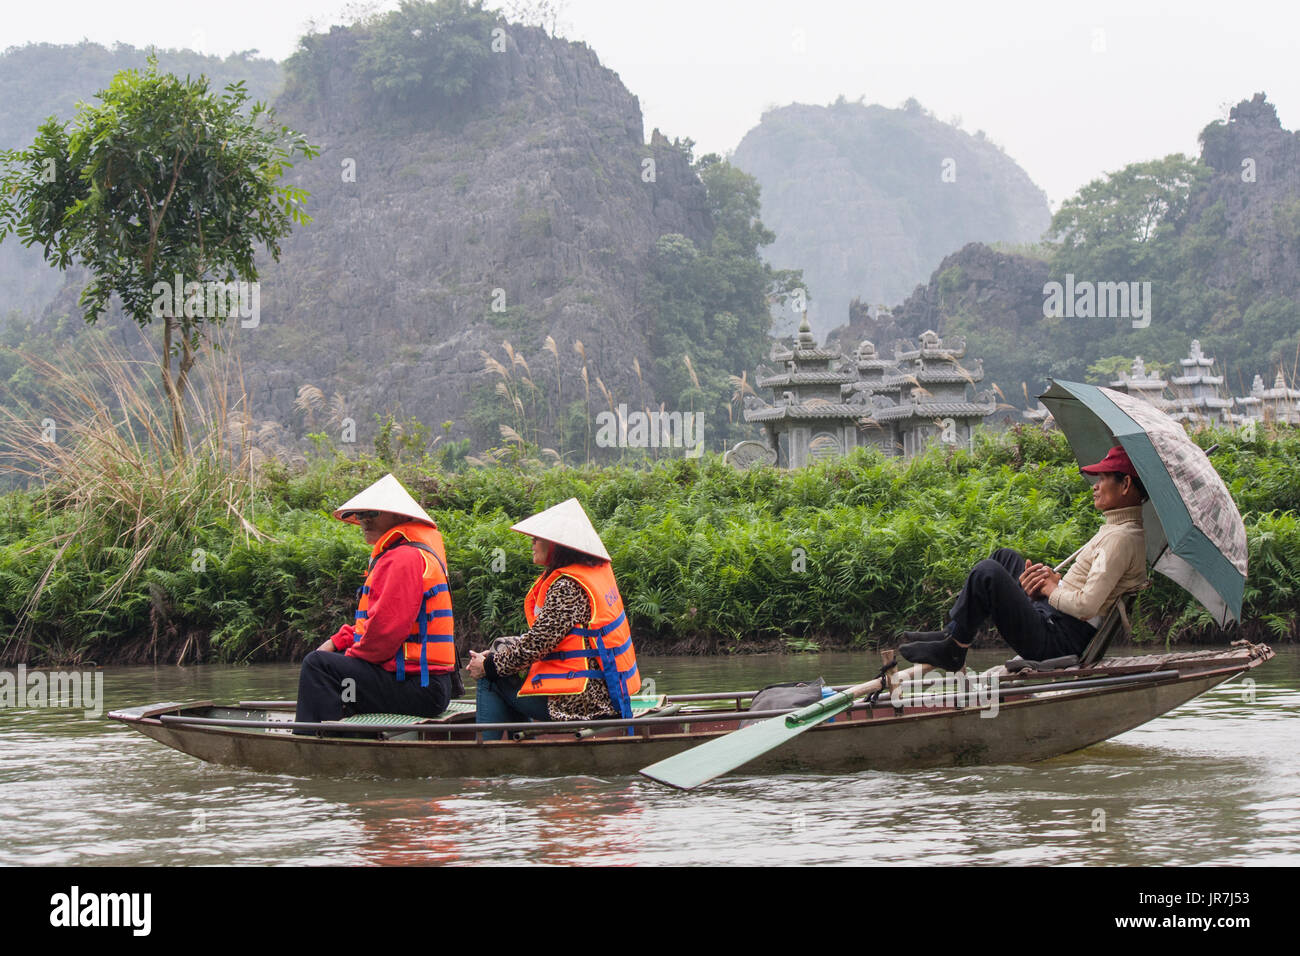 Two tourists are carried on a rowboat by a rower who shelters from the rain under an umbrella in Tam Coc, Vietnam Stock Photo